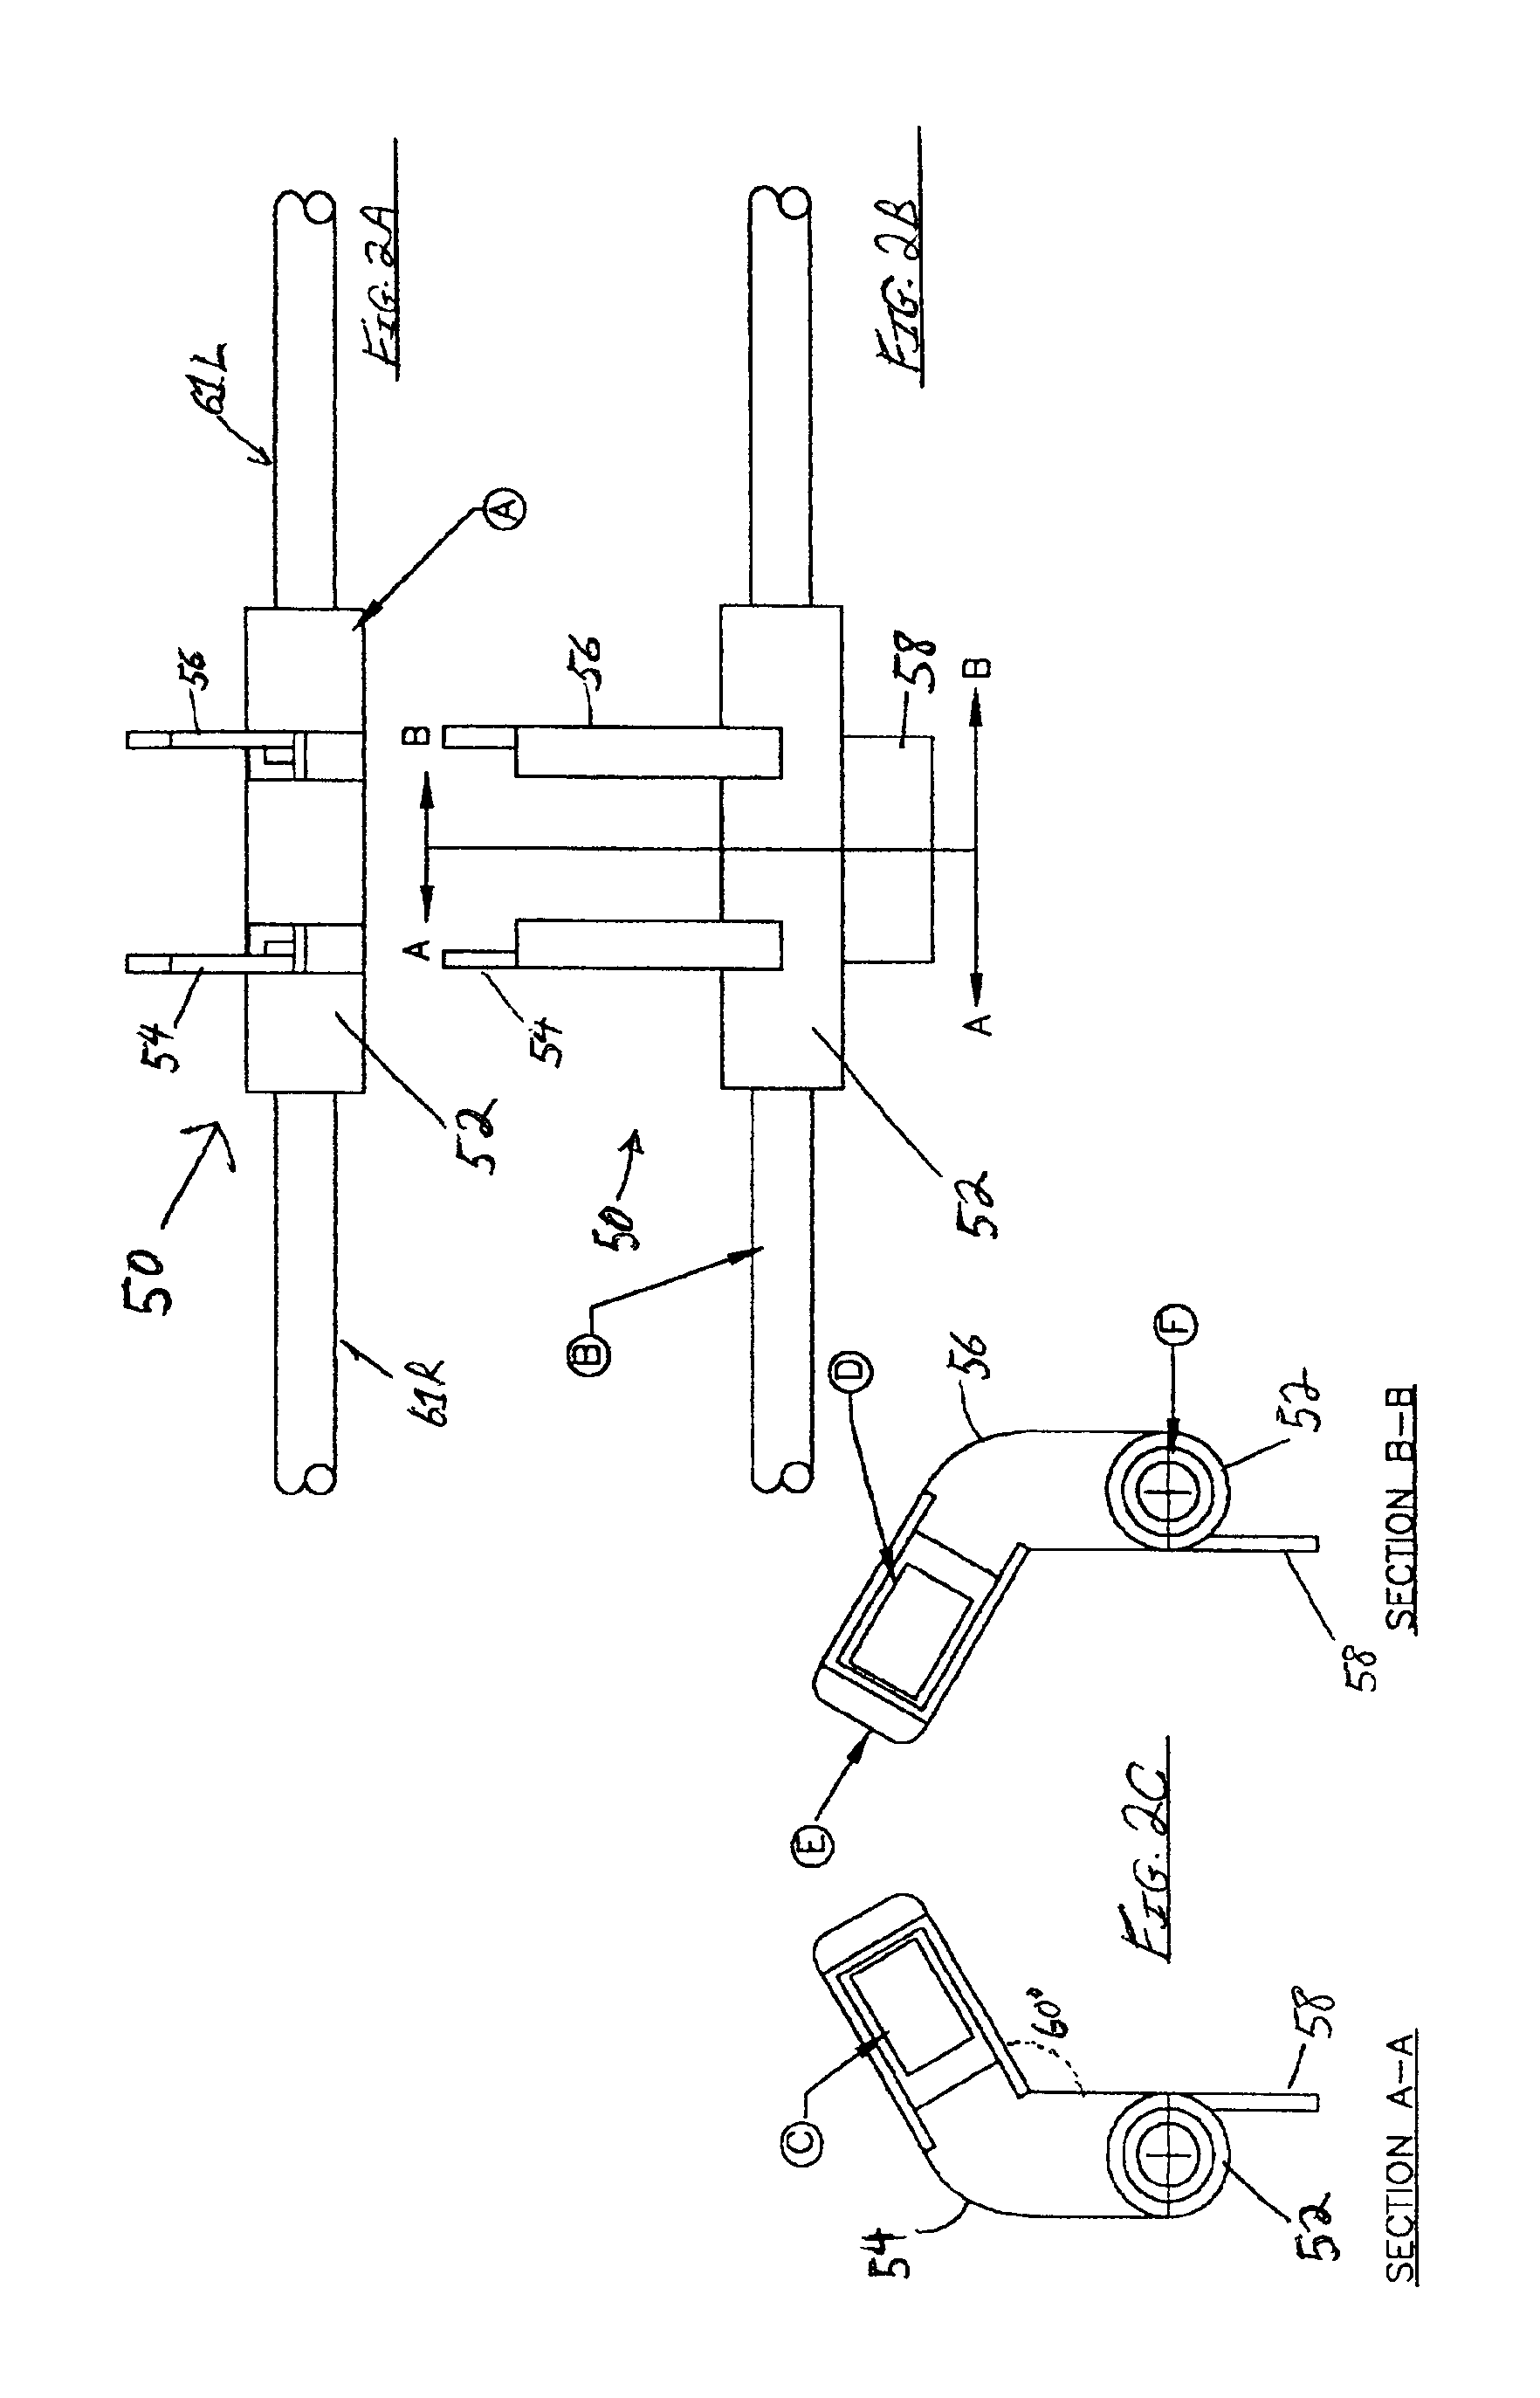 Non-invasive perfusion monitor and system, specially configured oximeter probes, methods of using same, and covers for probes